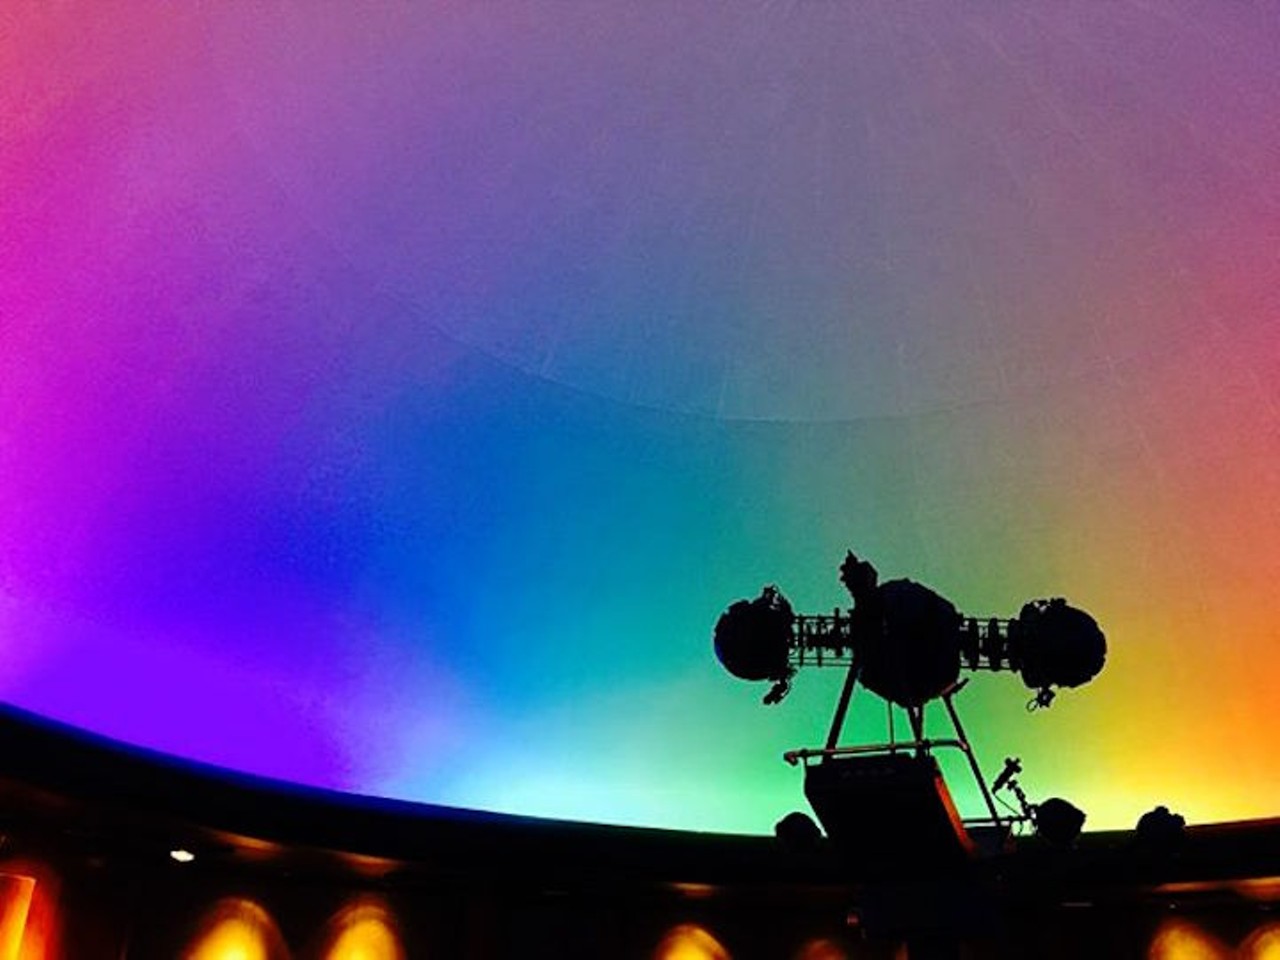 10. The Seminole State Planetarium
Humans are only a blip on the vast calendar of the Cosmos. We might as well make the most of it. You can use that line. 
Photo via tainosha/Instagram